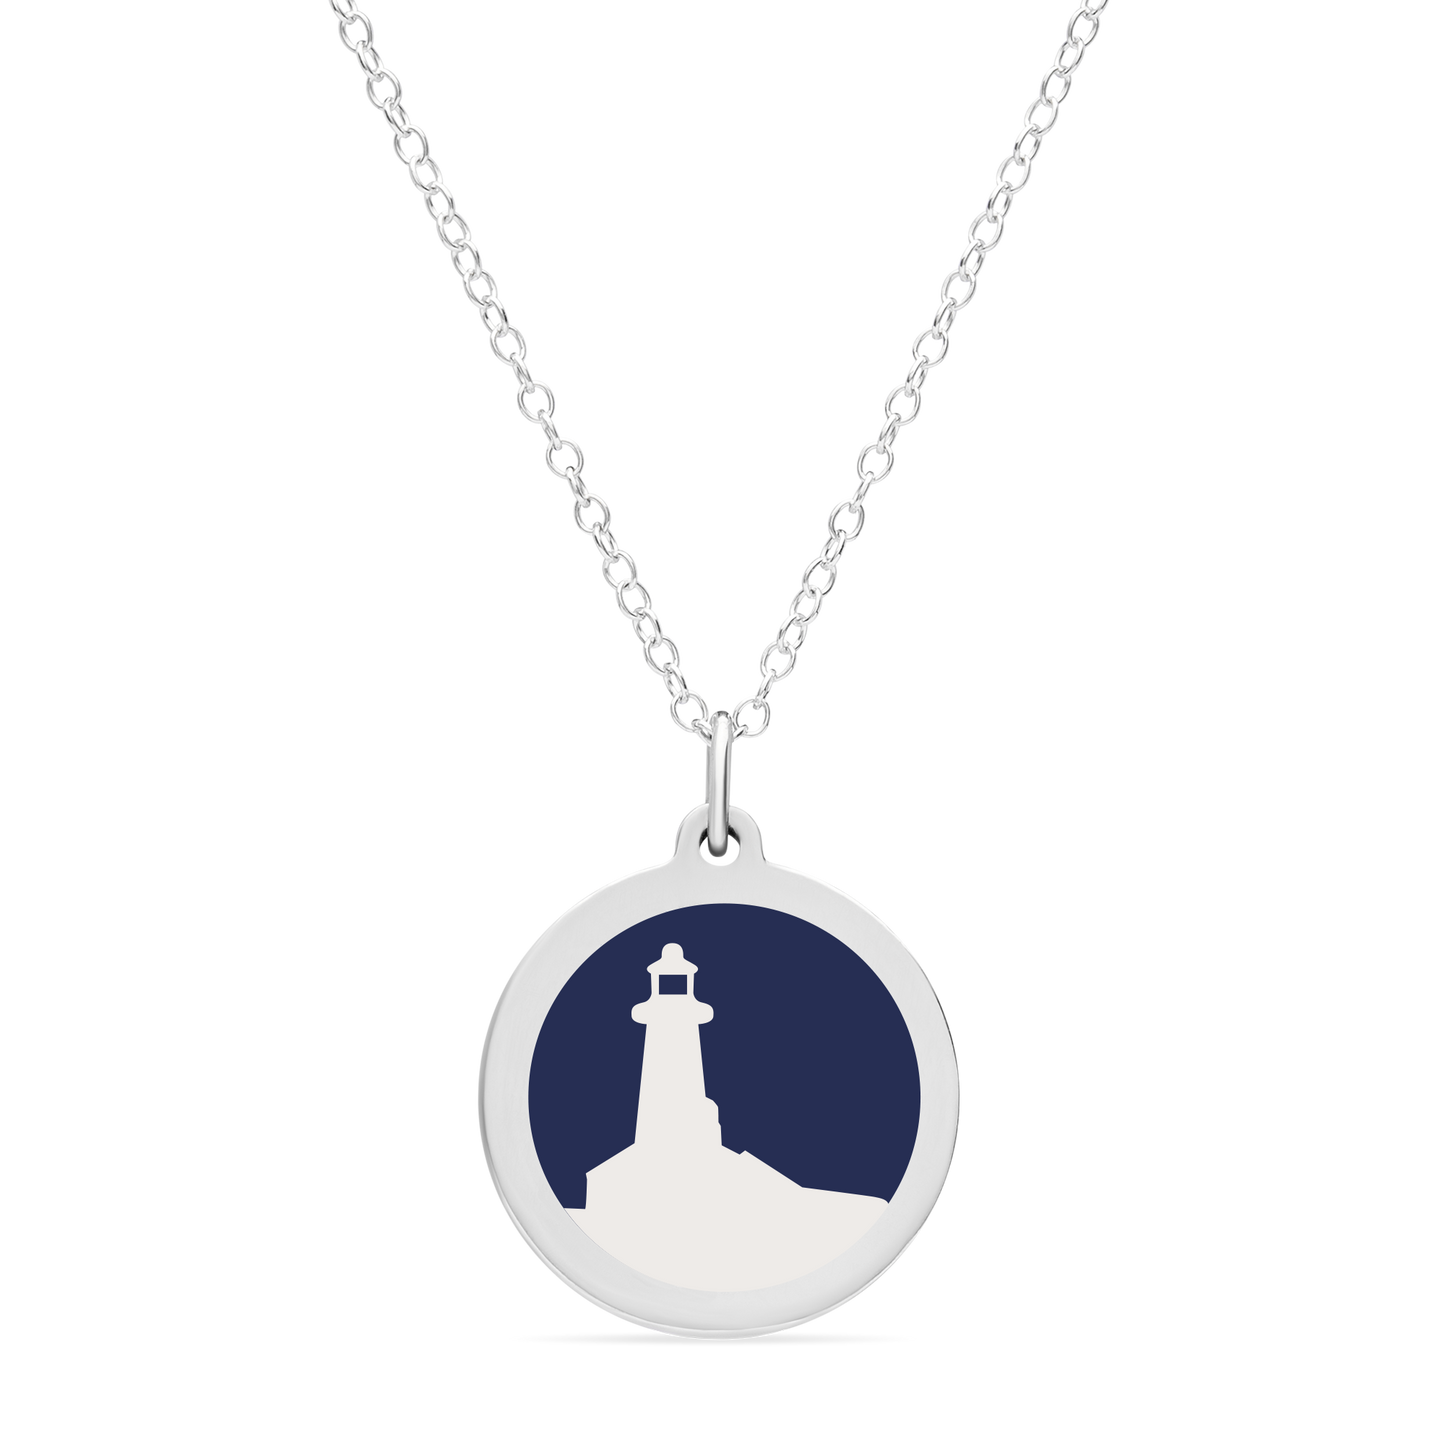 ORIGINAL LIGHTHOUSE CHARM in sterling silver with rhodium plate